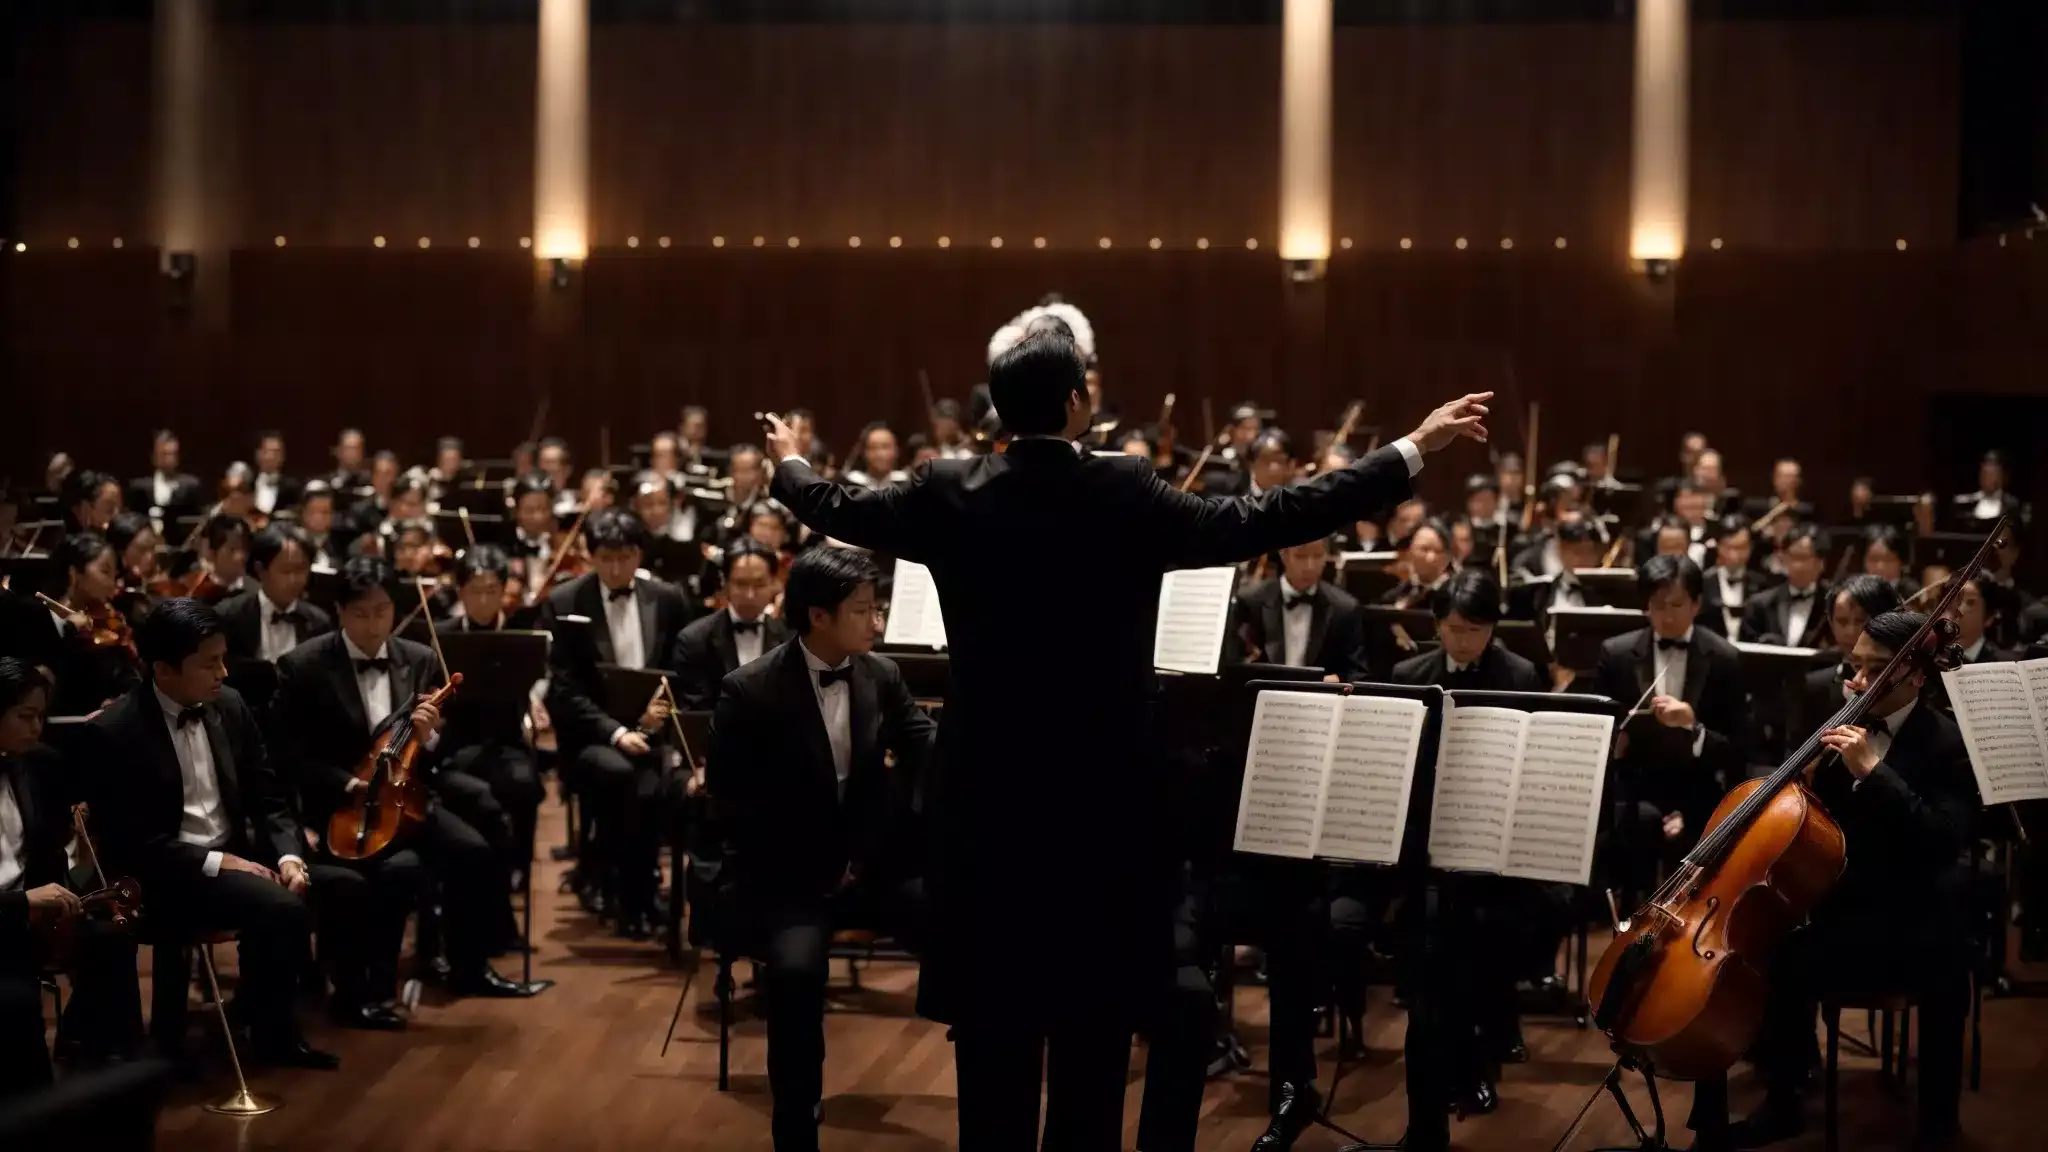 a conductor stands before an orchestra, baton poised, ready to guide the musicians through a harmonious performance.